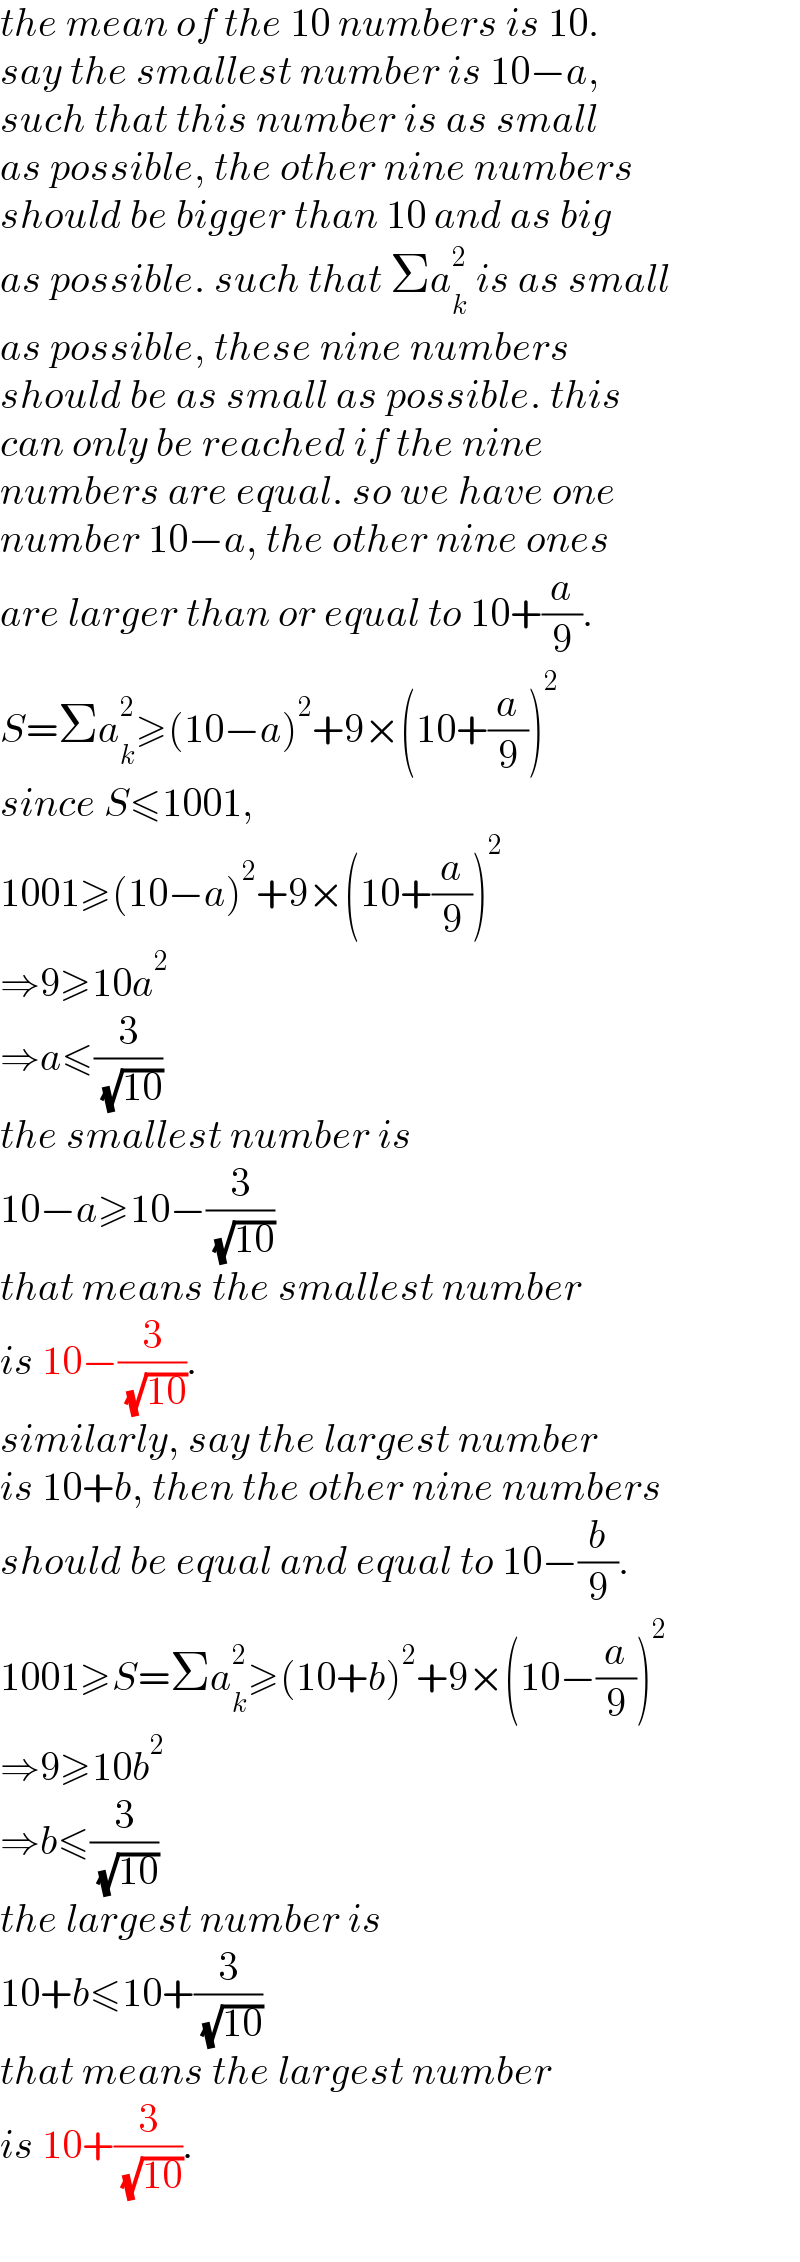 the mean of the 10 numbers is 10.  say the smallest number is 10−a,  such that this number is as small  as possible, the other nine numbers  should be bigger than 10 and as big  as possible. such that Σa_k ^2  is as small  as possible, these nine numbers   should be as small as possible. this  can only be reached if the nine  numbers are equal. so we have one  number 10−a, the other nine ones  are larger than or equal to 10+(a/9).  S=Σa_k ^2 ≥(10−a)^2 +9×(10+(a/9))^2   since S≤1001,  1001≥(10−a)^2 +9×(10+(a/9))^2   ⇒9≥10a^2   ⇒a≤(3/( (√(10))))  the smallest number is  10−a≥10−(3/( (√(10))))  that means the smallest number  is 10−(3/( (√(10)))).  similarly, say the largest number  is 10+b, then the other nine numbers  should be equal and equal to 10−(b/9).  1001≥S=Σa_k ^2 ≥(10+b)^2 +9×(10−(a/9))^2   ⇒9≥10b^2   ⇒b≤(3/( (√(10))))  the largest number is  10+b≤10+(3/( (√(10))))  that means the largest number  is 10+(3/( (√(10)))).  